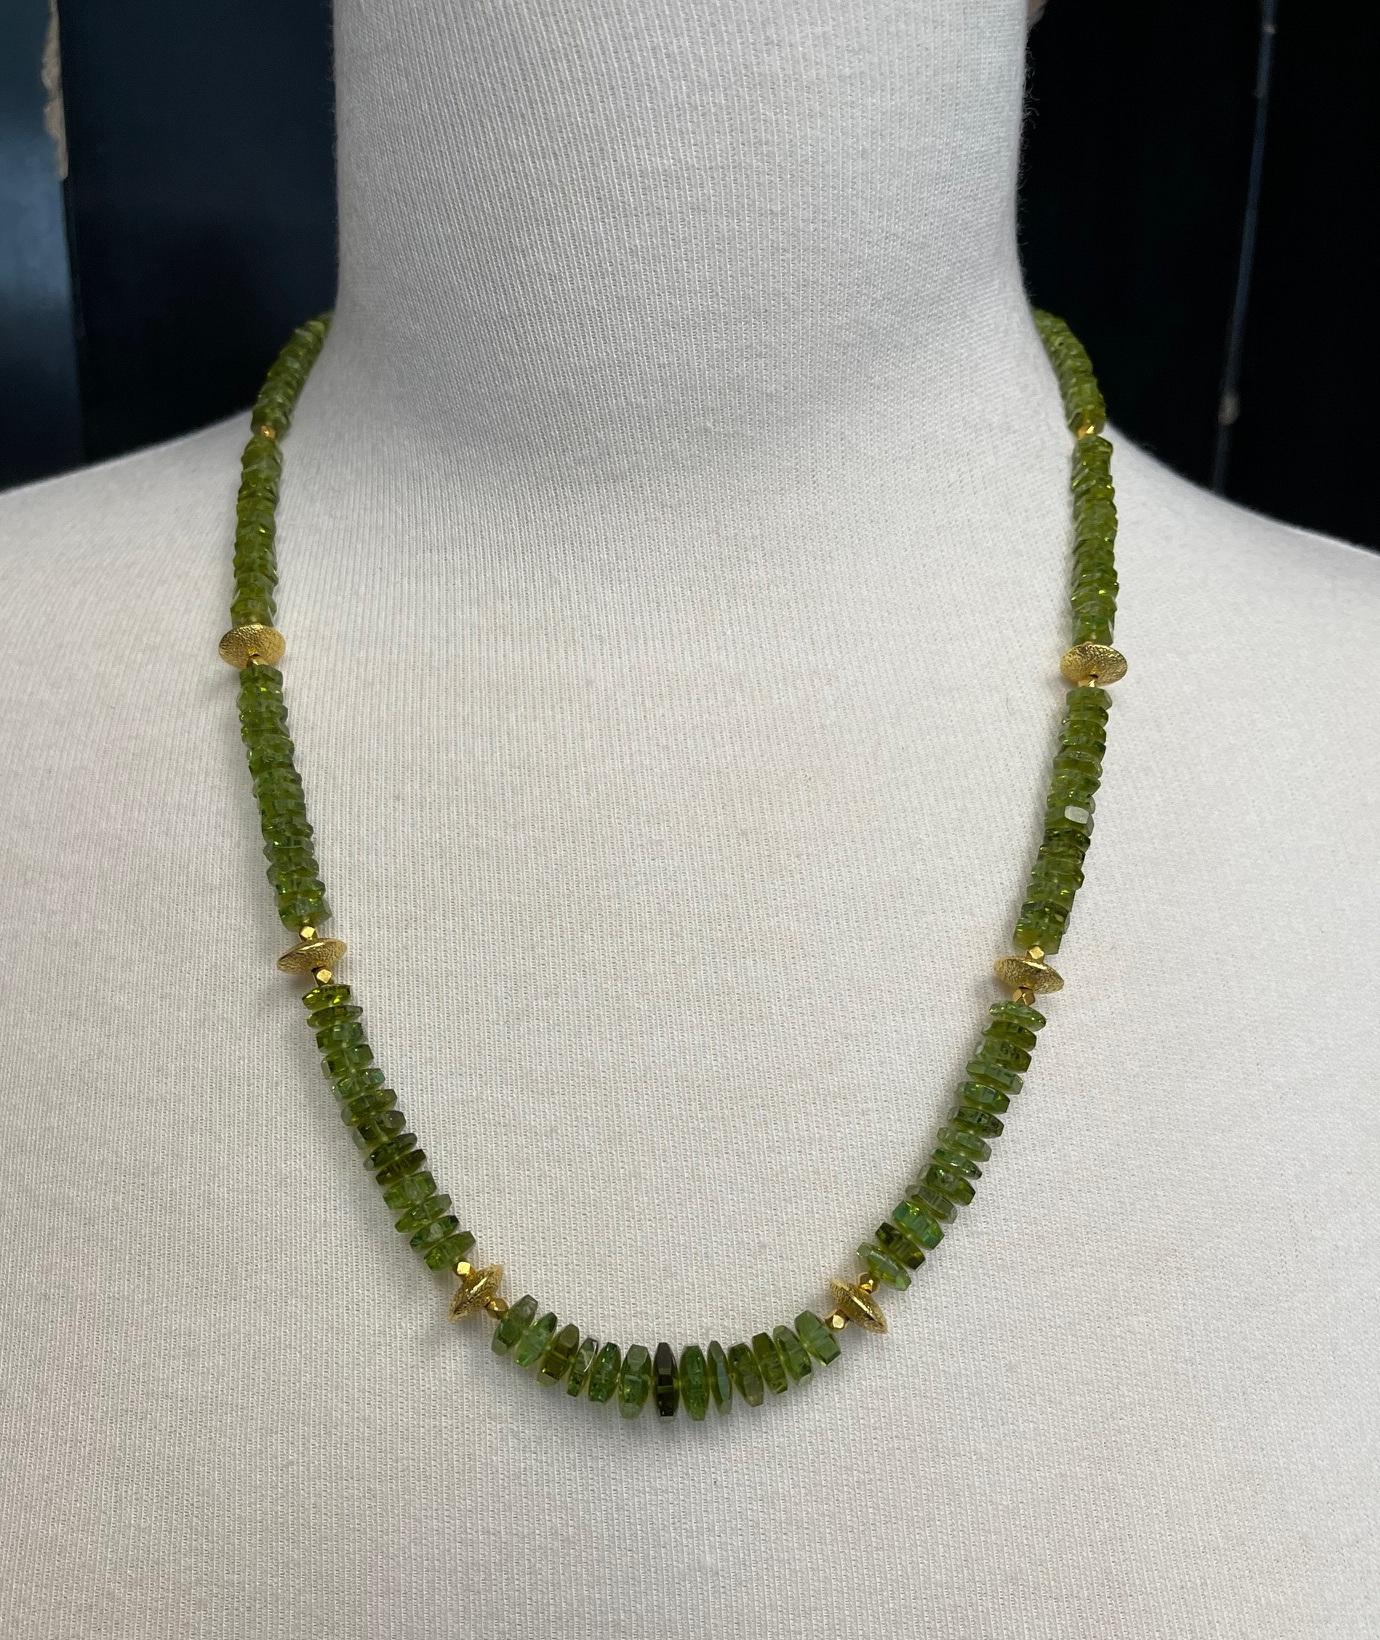 Green Tourmaline Bead and 18k Yellow Gold Necklace, Adjustable Length For Sale 2